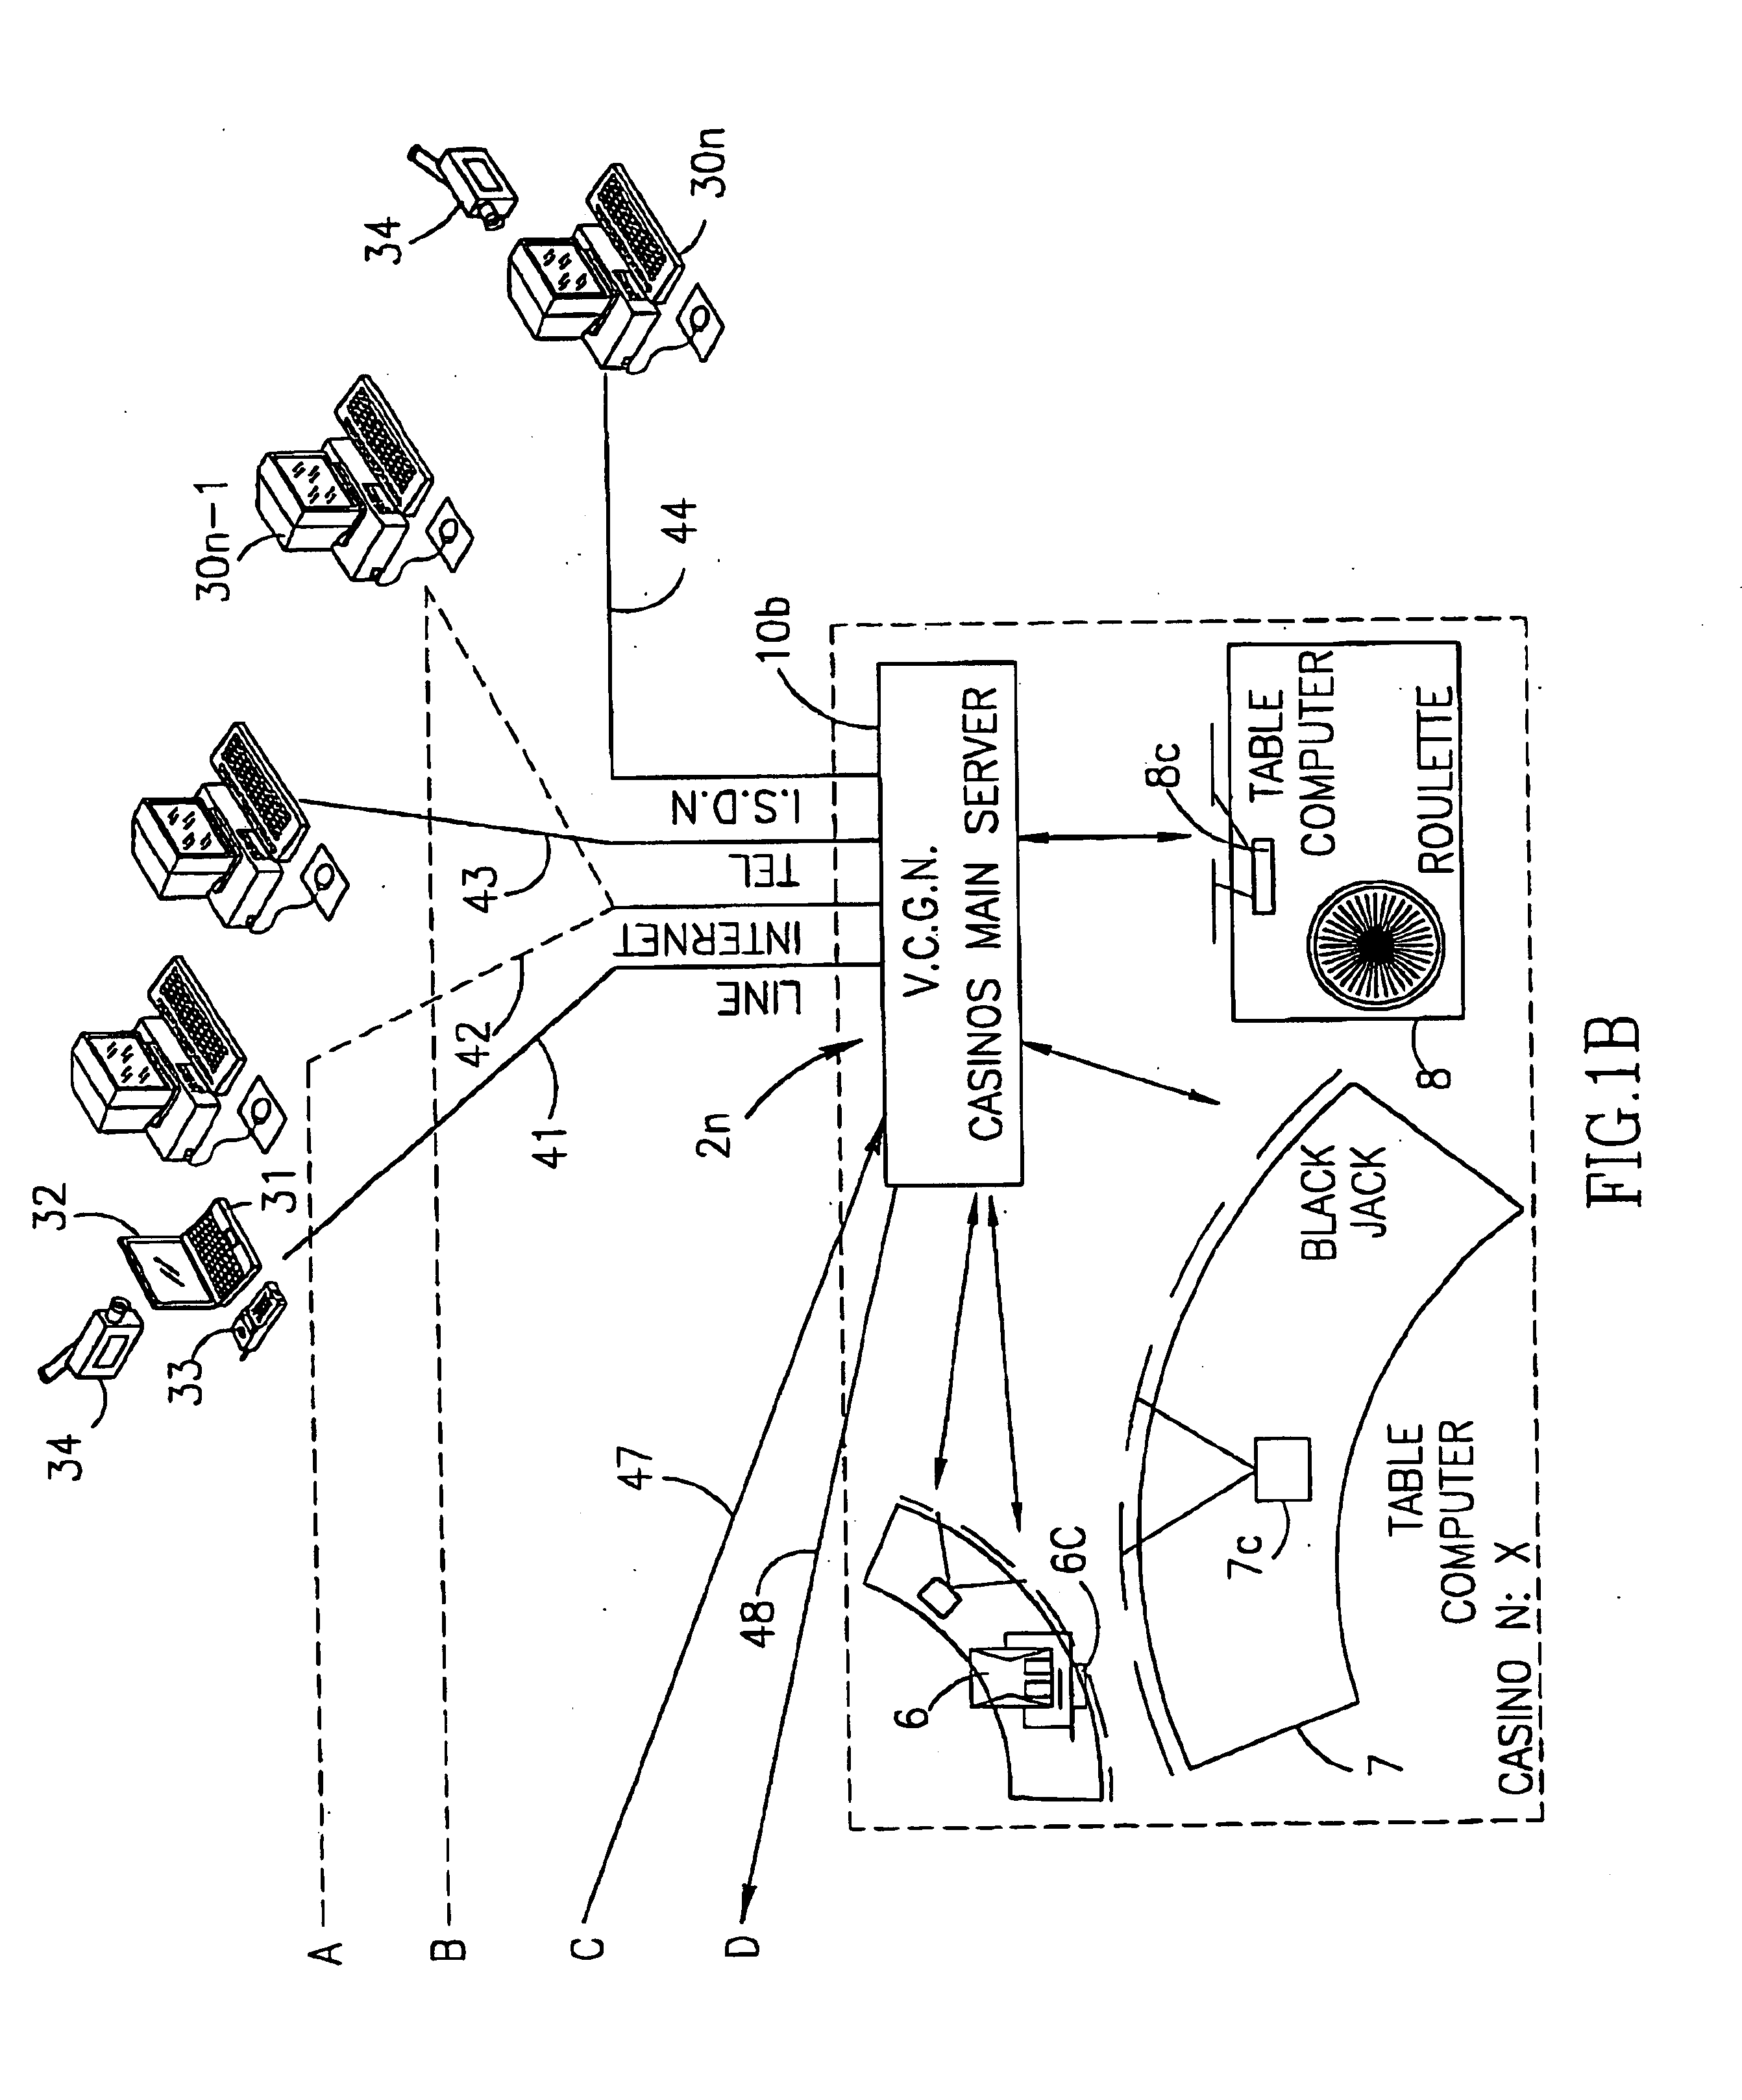 Gambling game system and method for remotely-located players